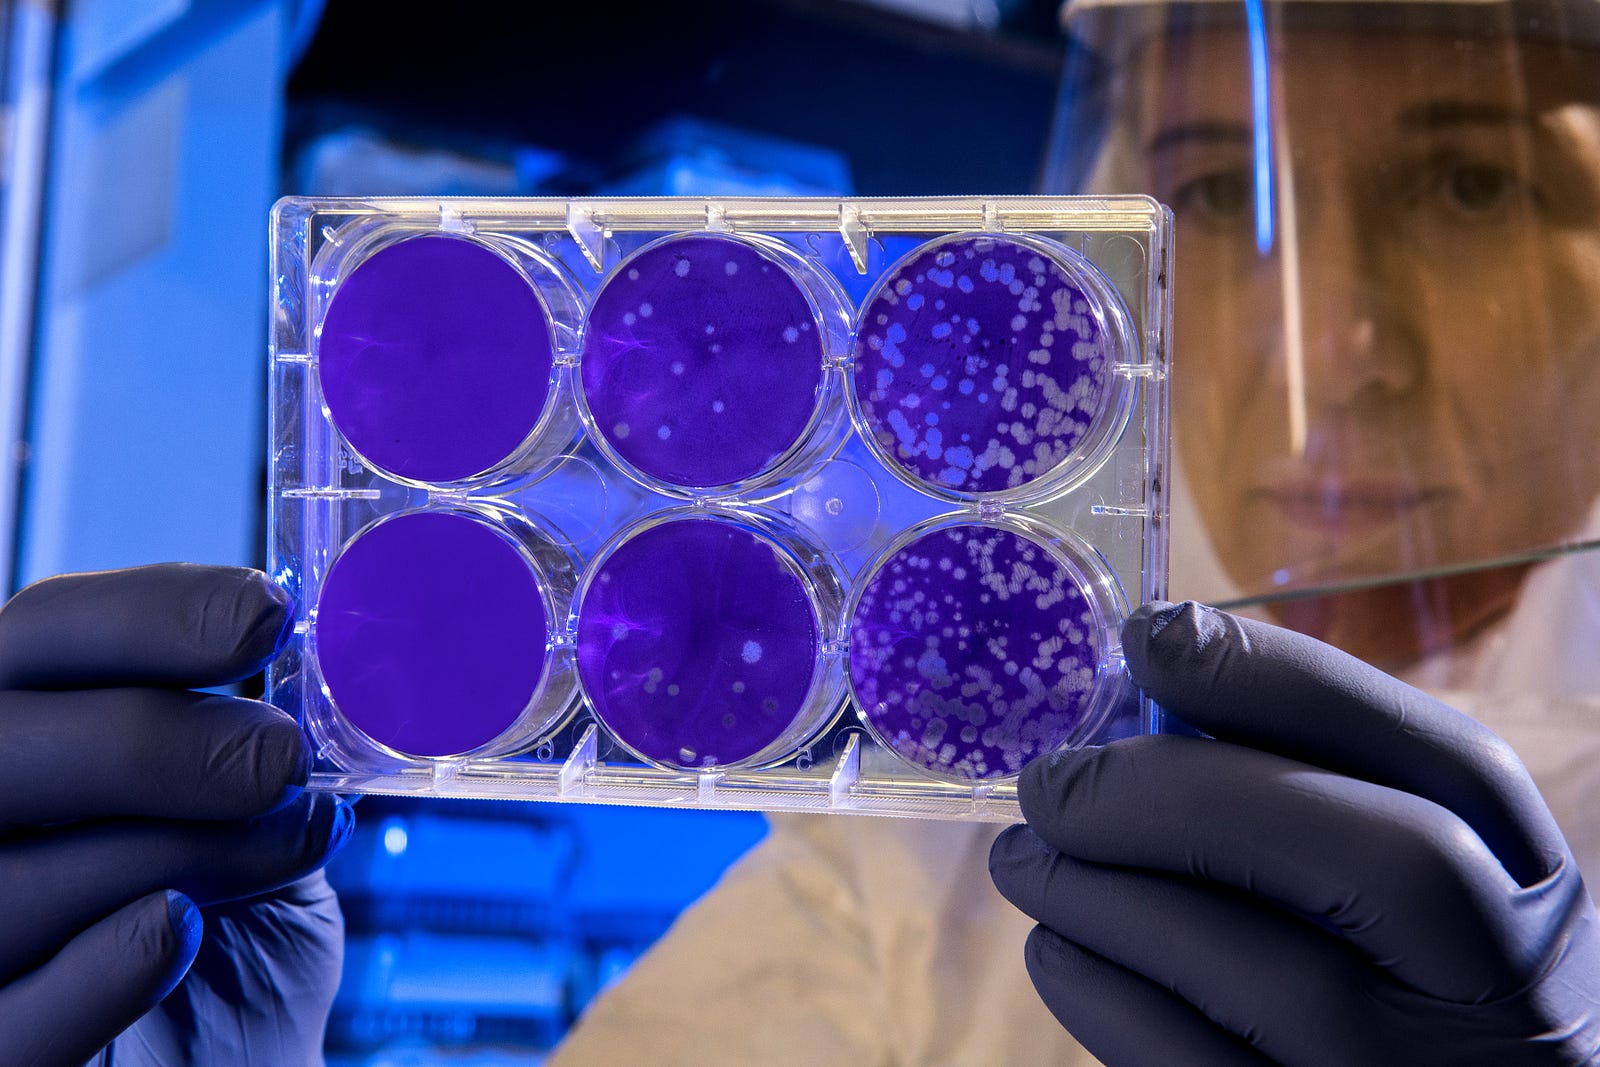 A scientists peer at a tray of six petri dishes. The media are purple, with microbial colonies white. Since shopping carts are often left outside, the researchers considered how the local climate might affect bacteria survival. For example, factors like humidity and temperature can impact bacteria on surfaces. They focused on the cart handle and seat, swabbing them with a SpongeStick containing a neutralizing buffer.